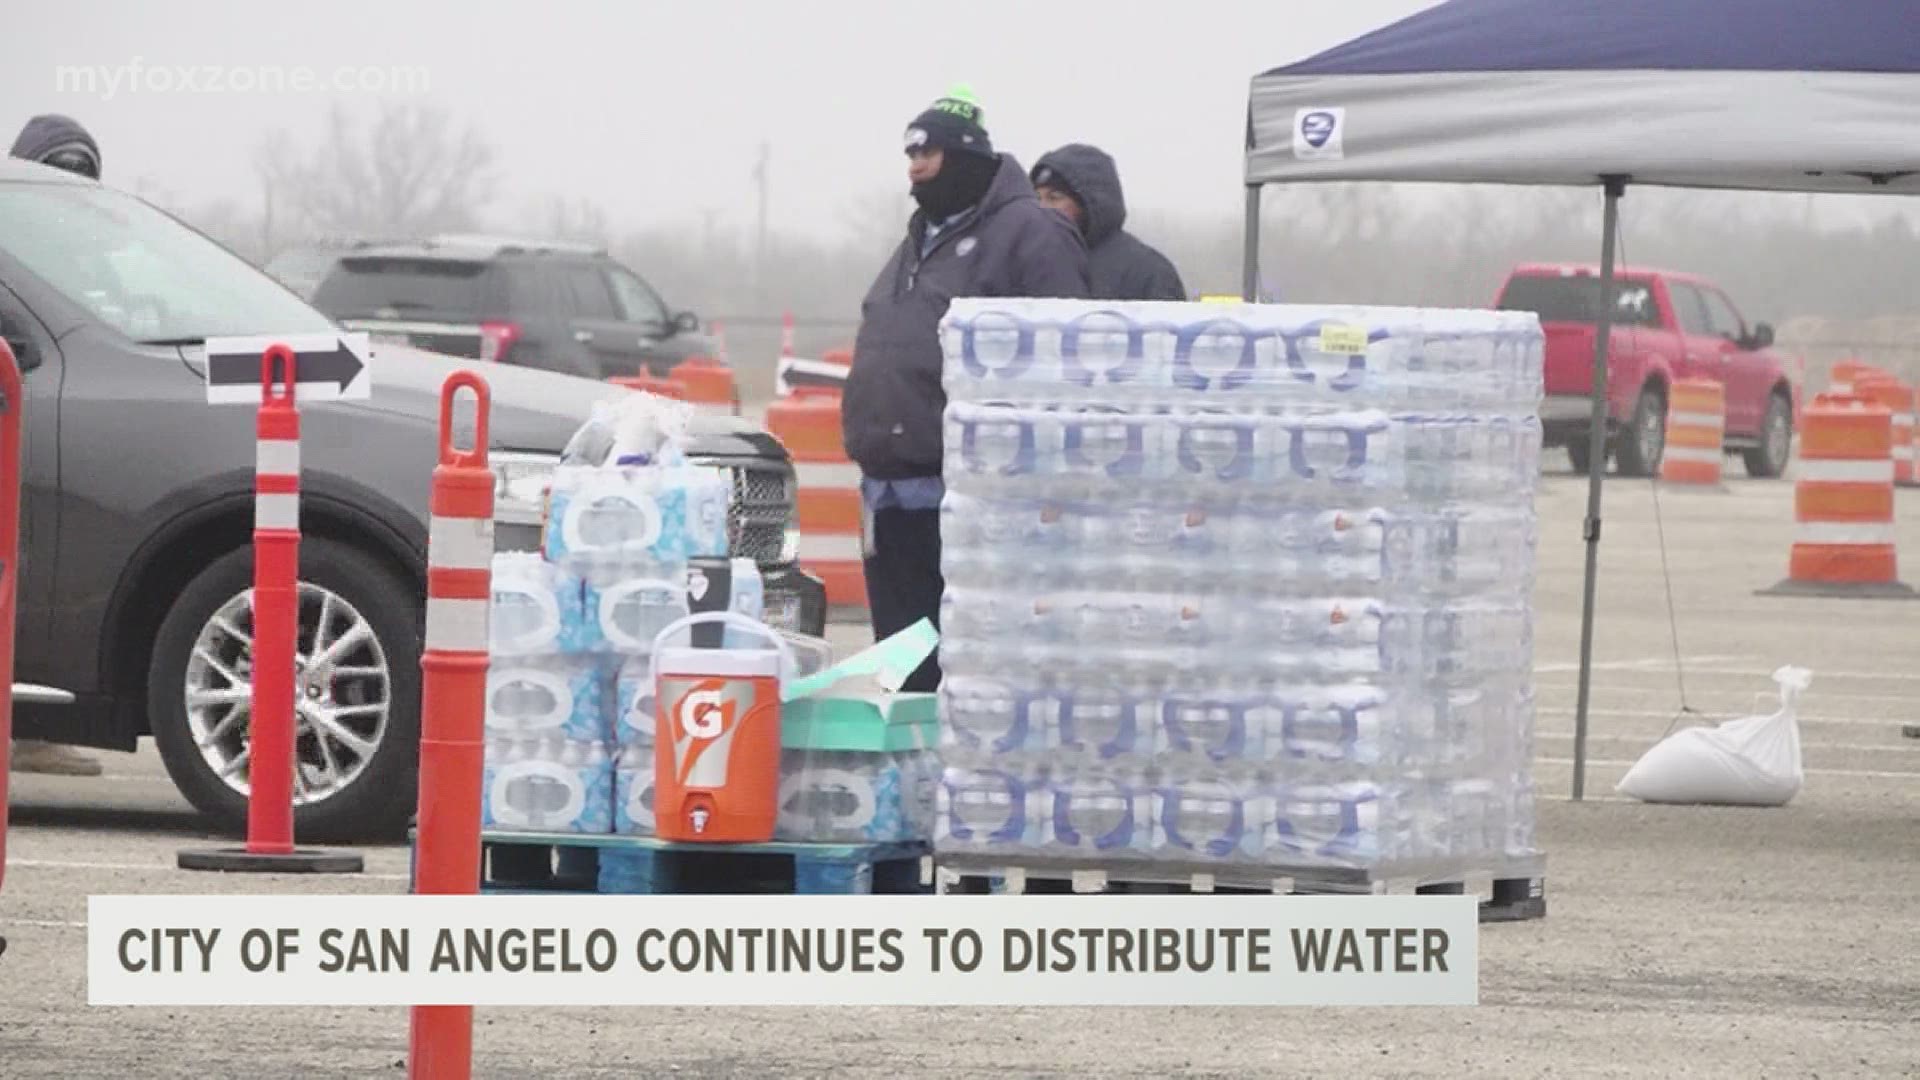 13,000 cases of water came into the distribution center.